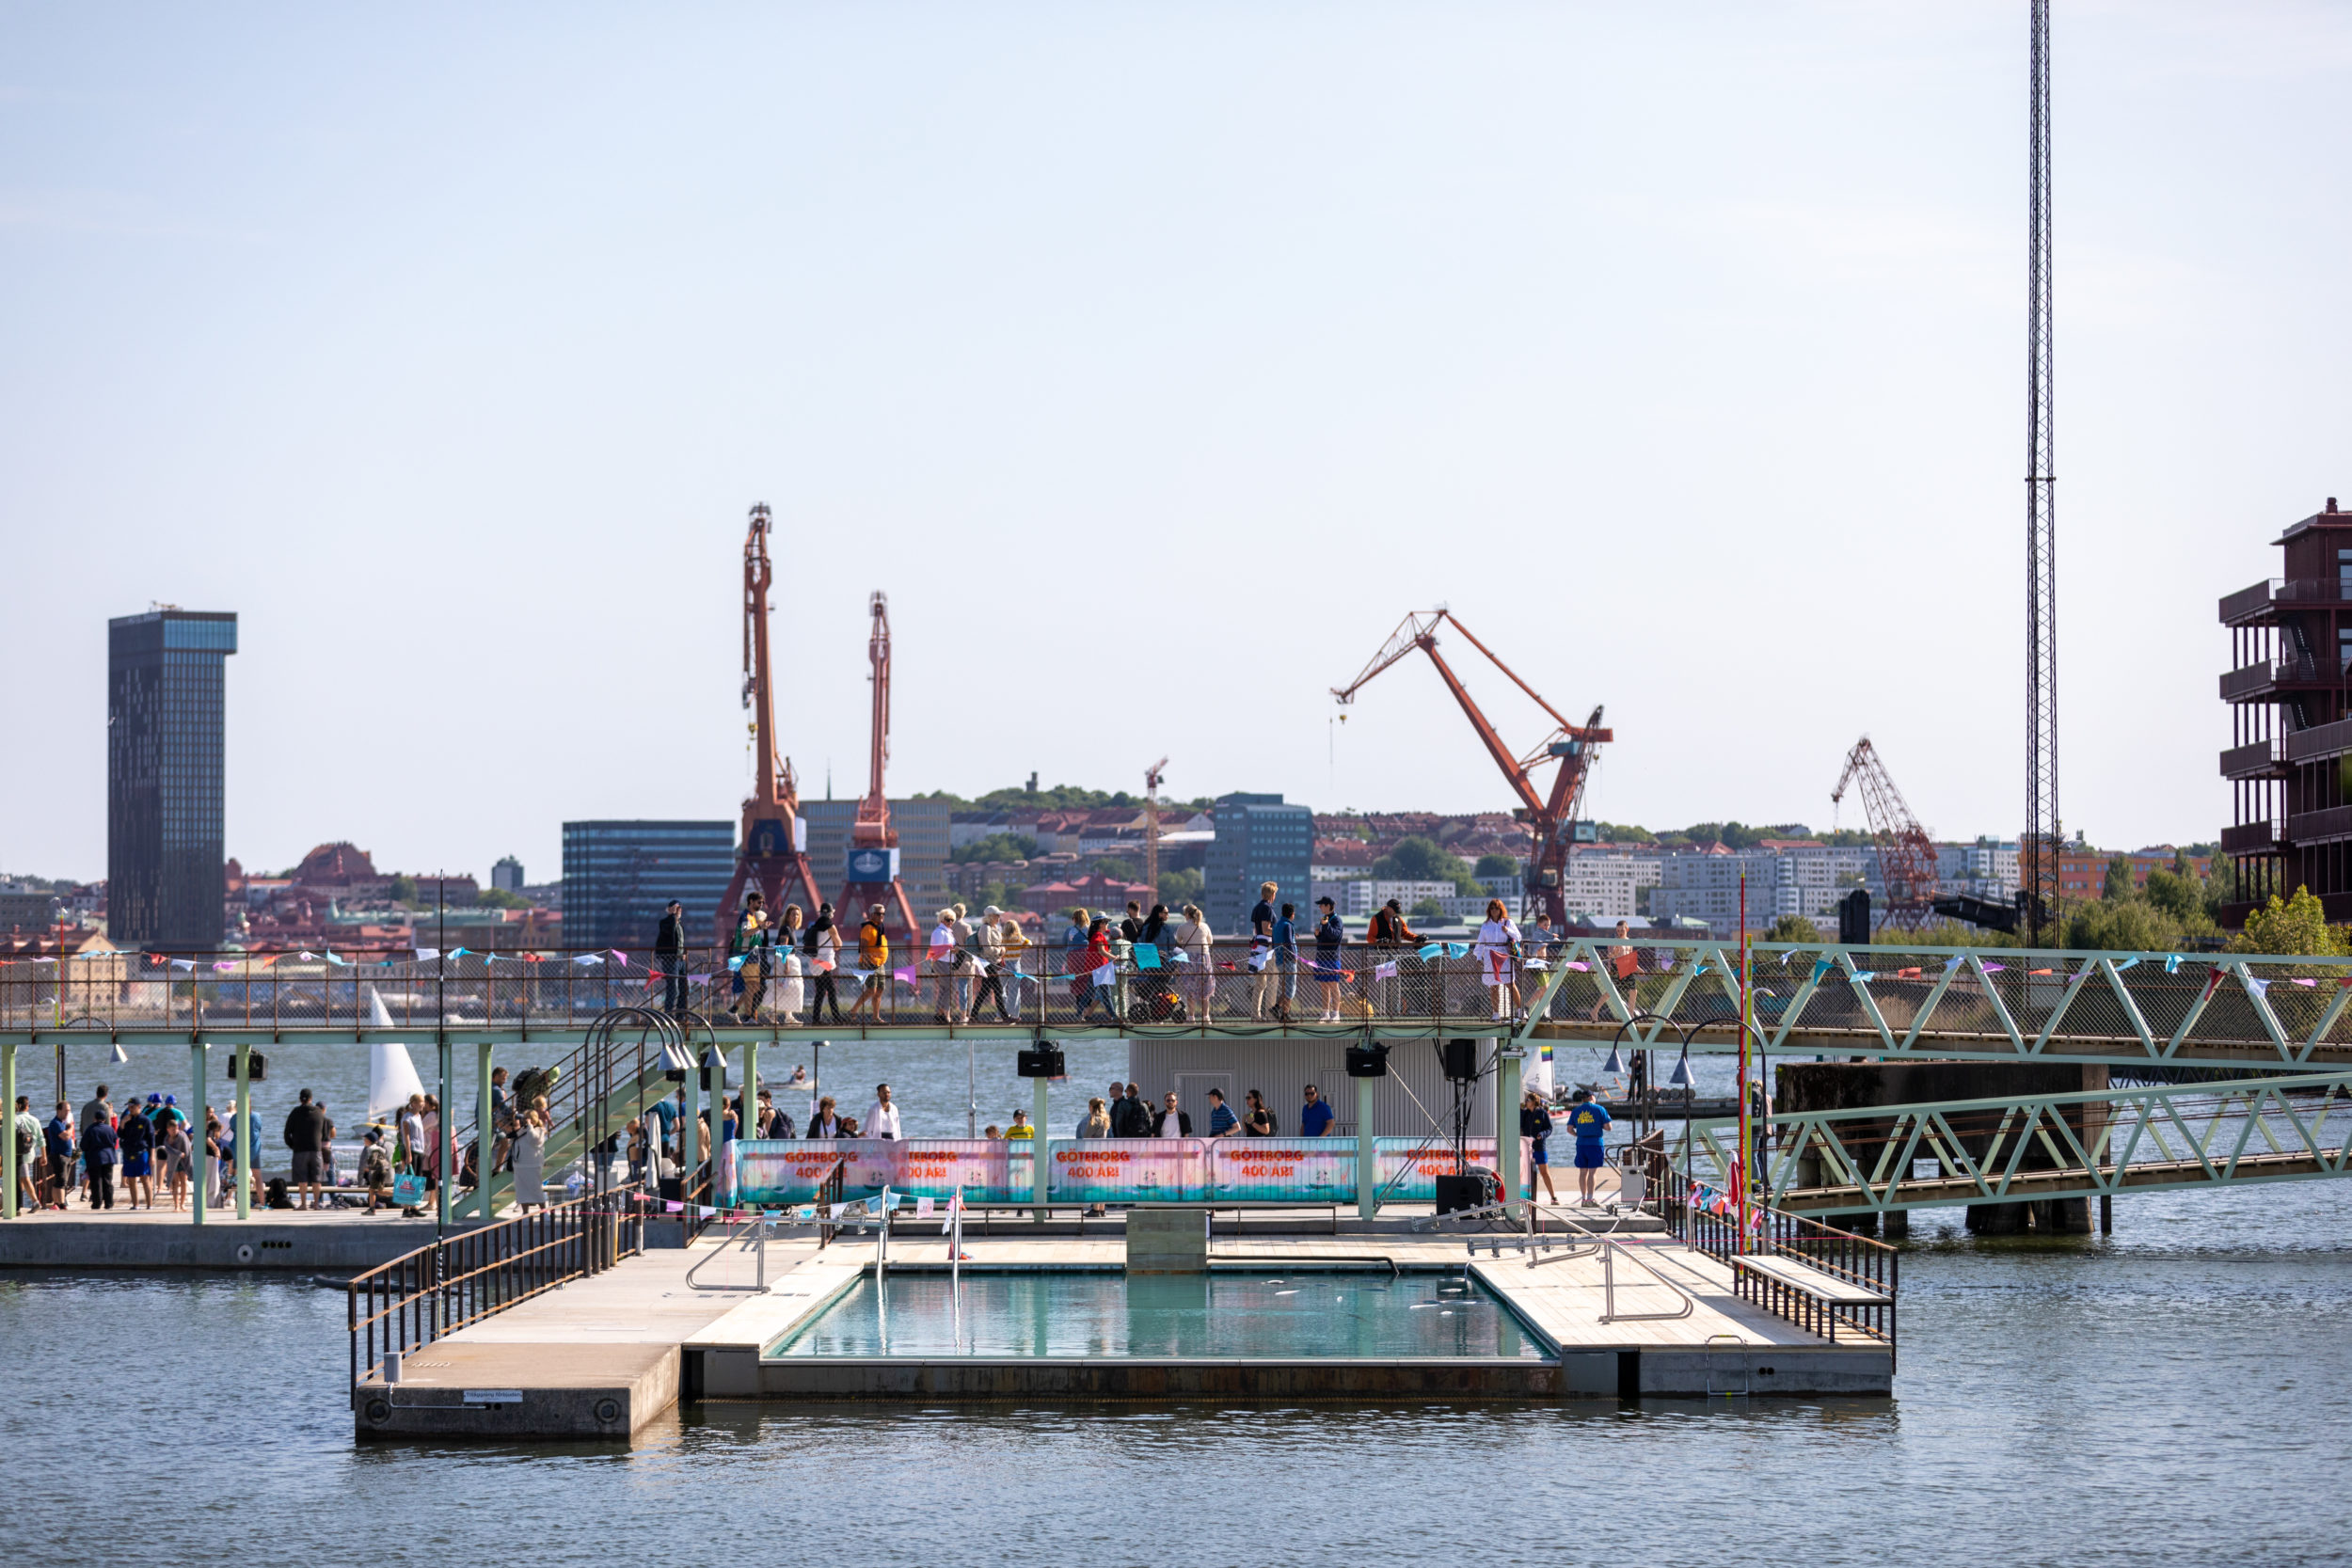 The public floating pools in the Jubilee Park in Gothenburg.